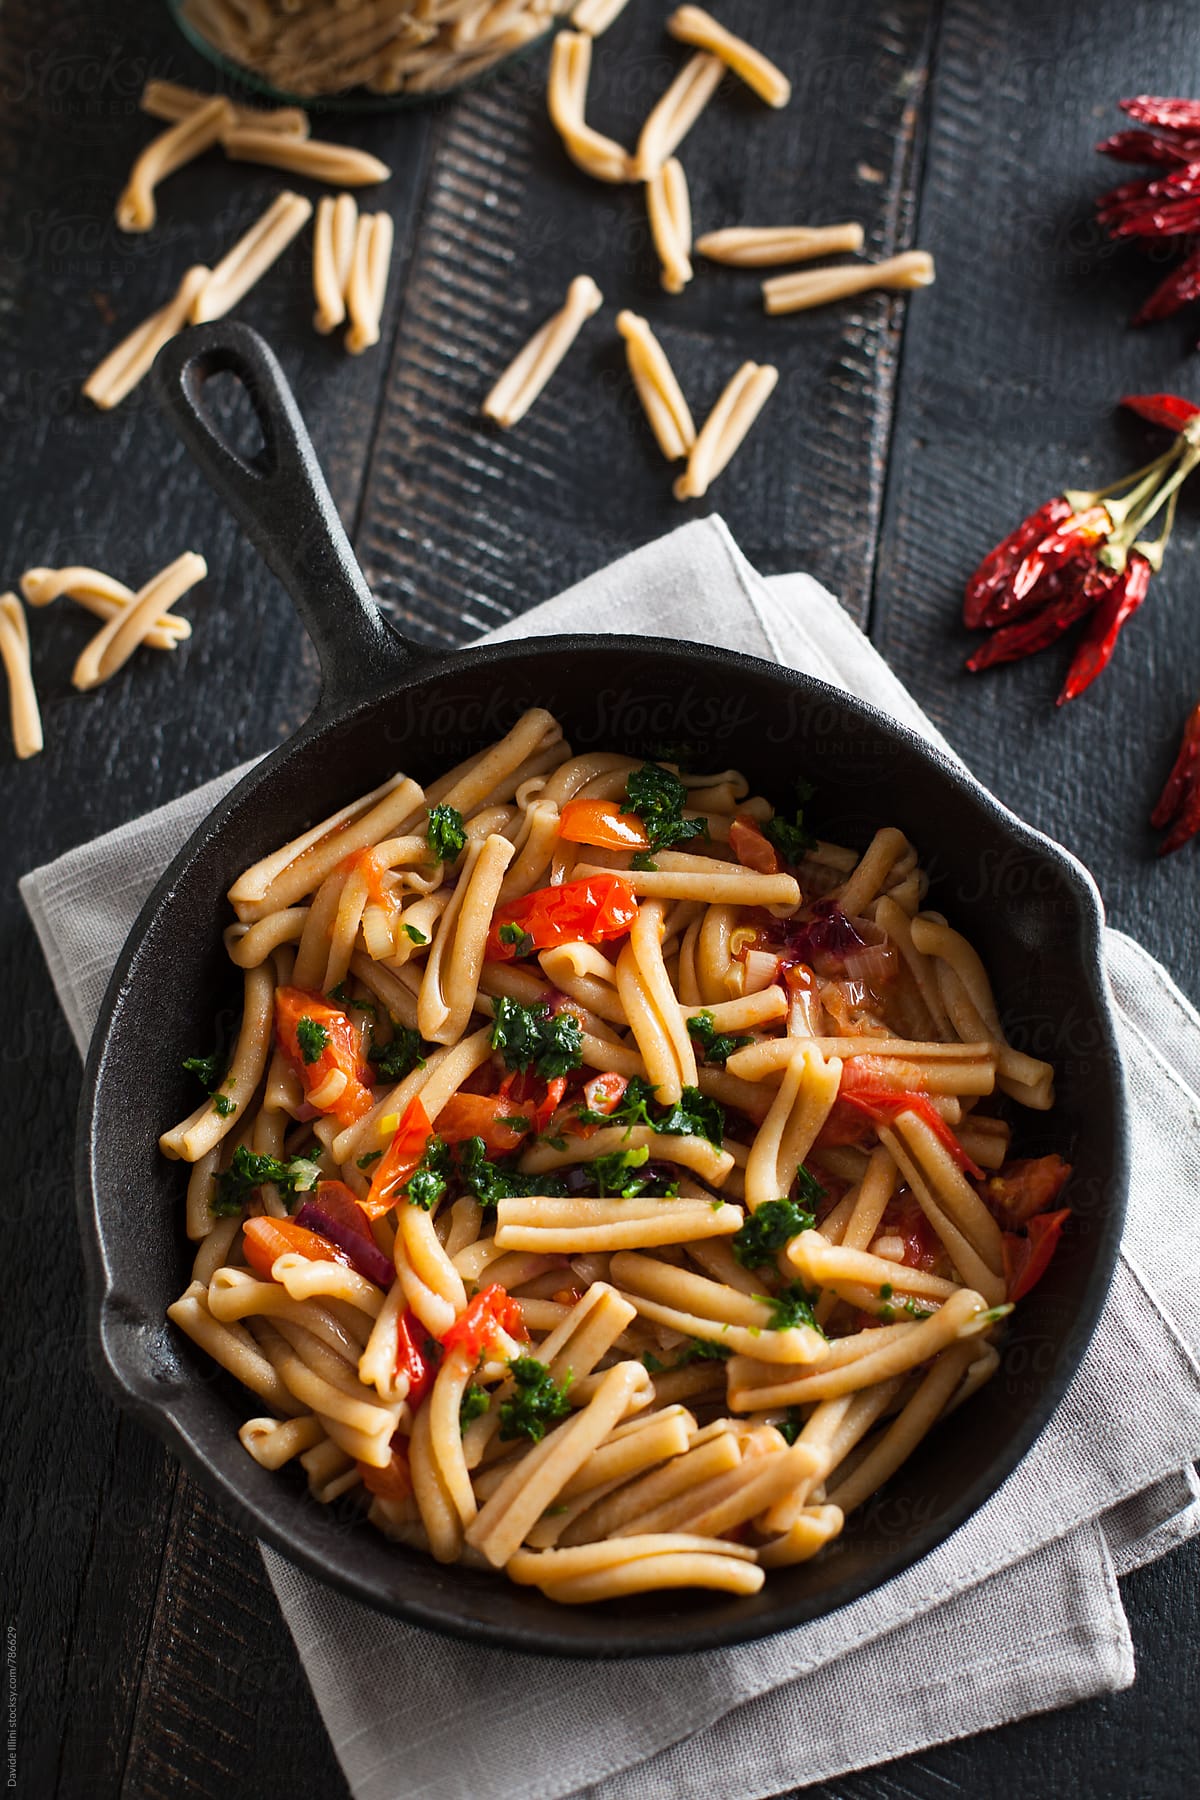 Wheat pasta with fresh tomatoes